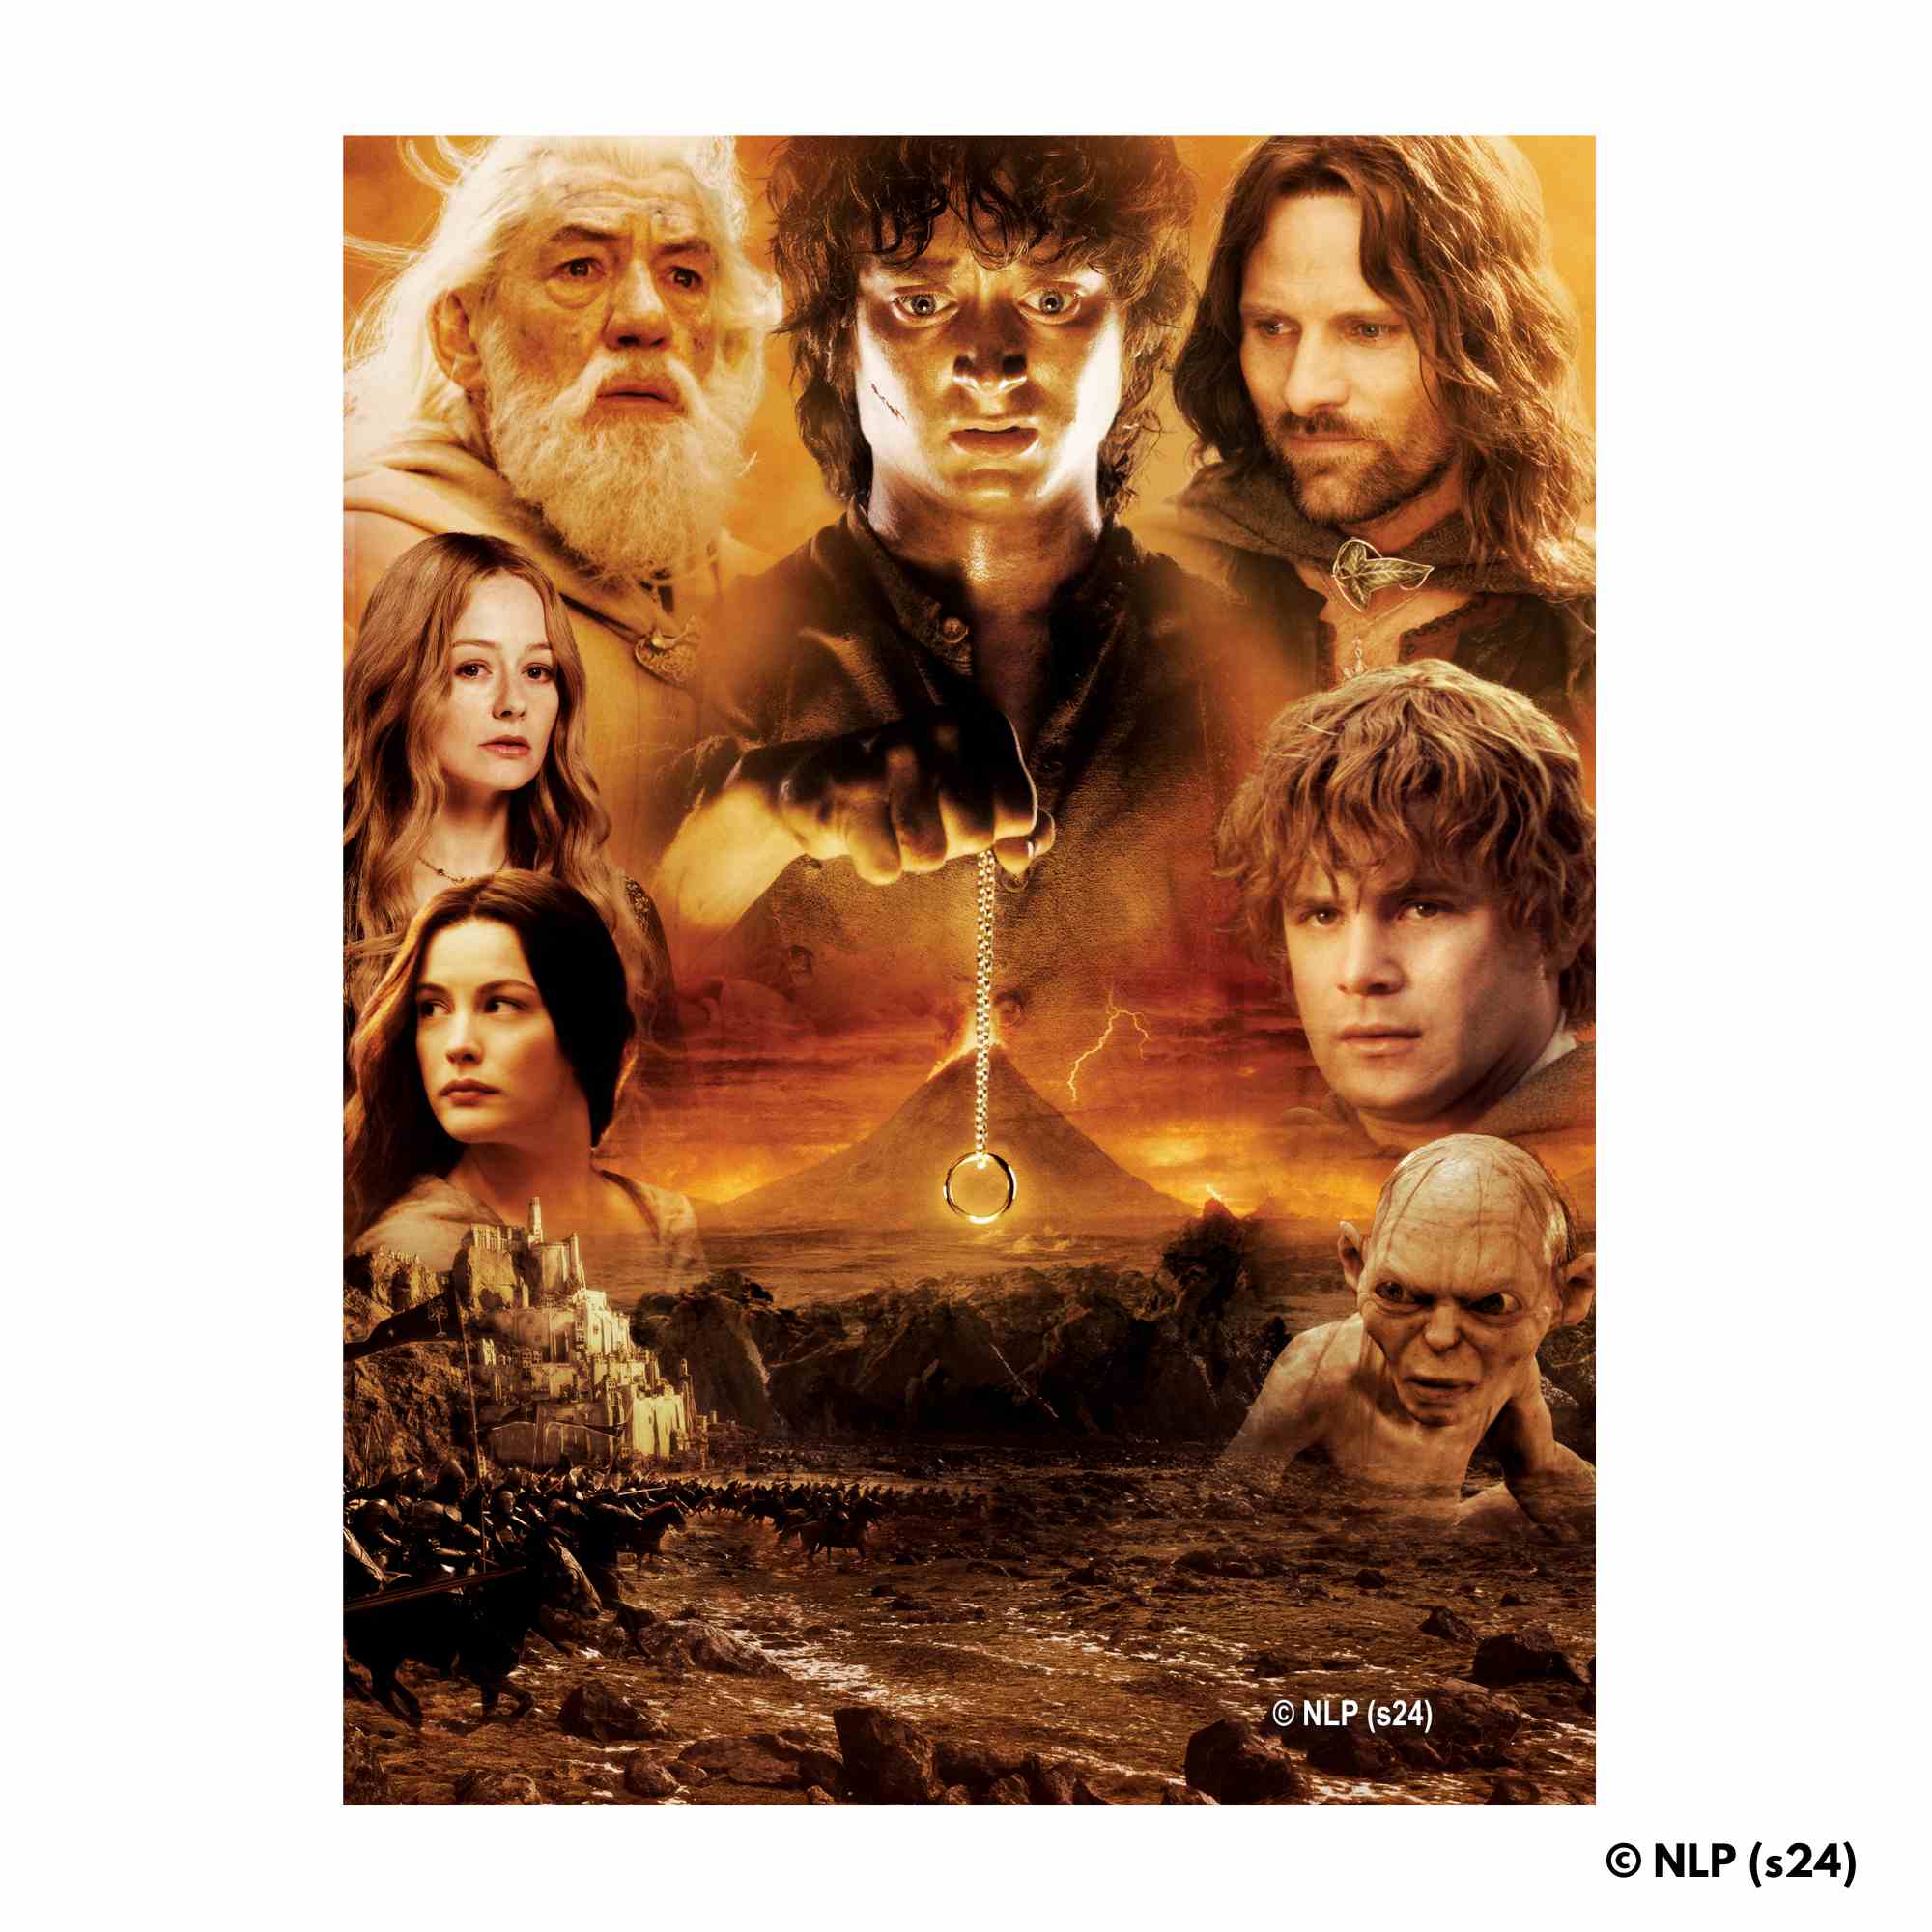 Animal Jigsaw Puzzle > Wooden Jigsaw Puzzle > Jigsaw Puzzle The Lord of the Rings - Wooden Jigsaw Puzzle